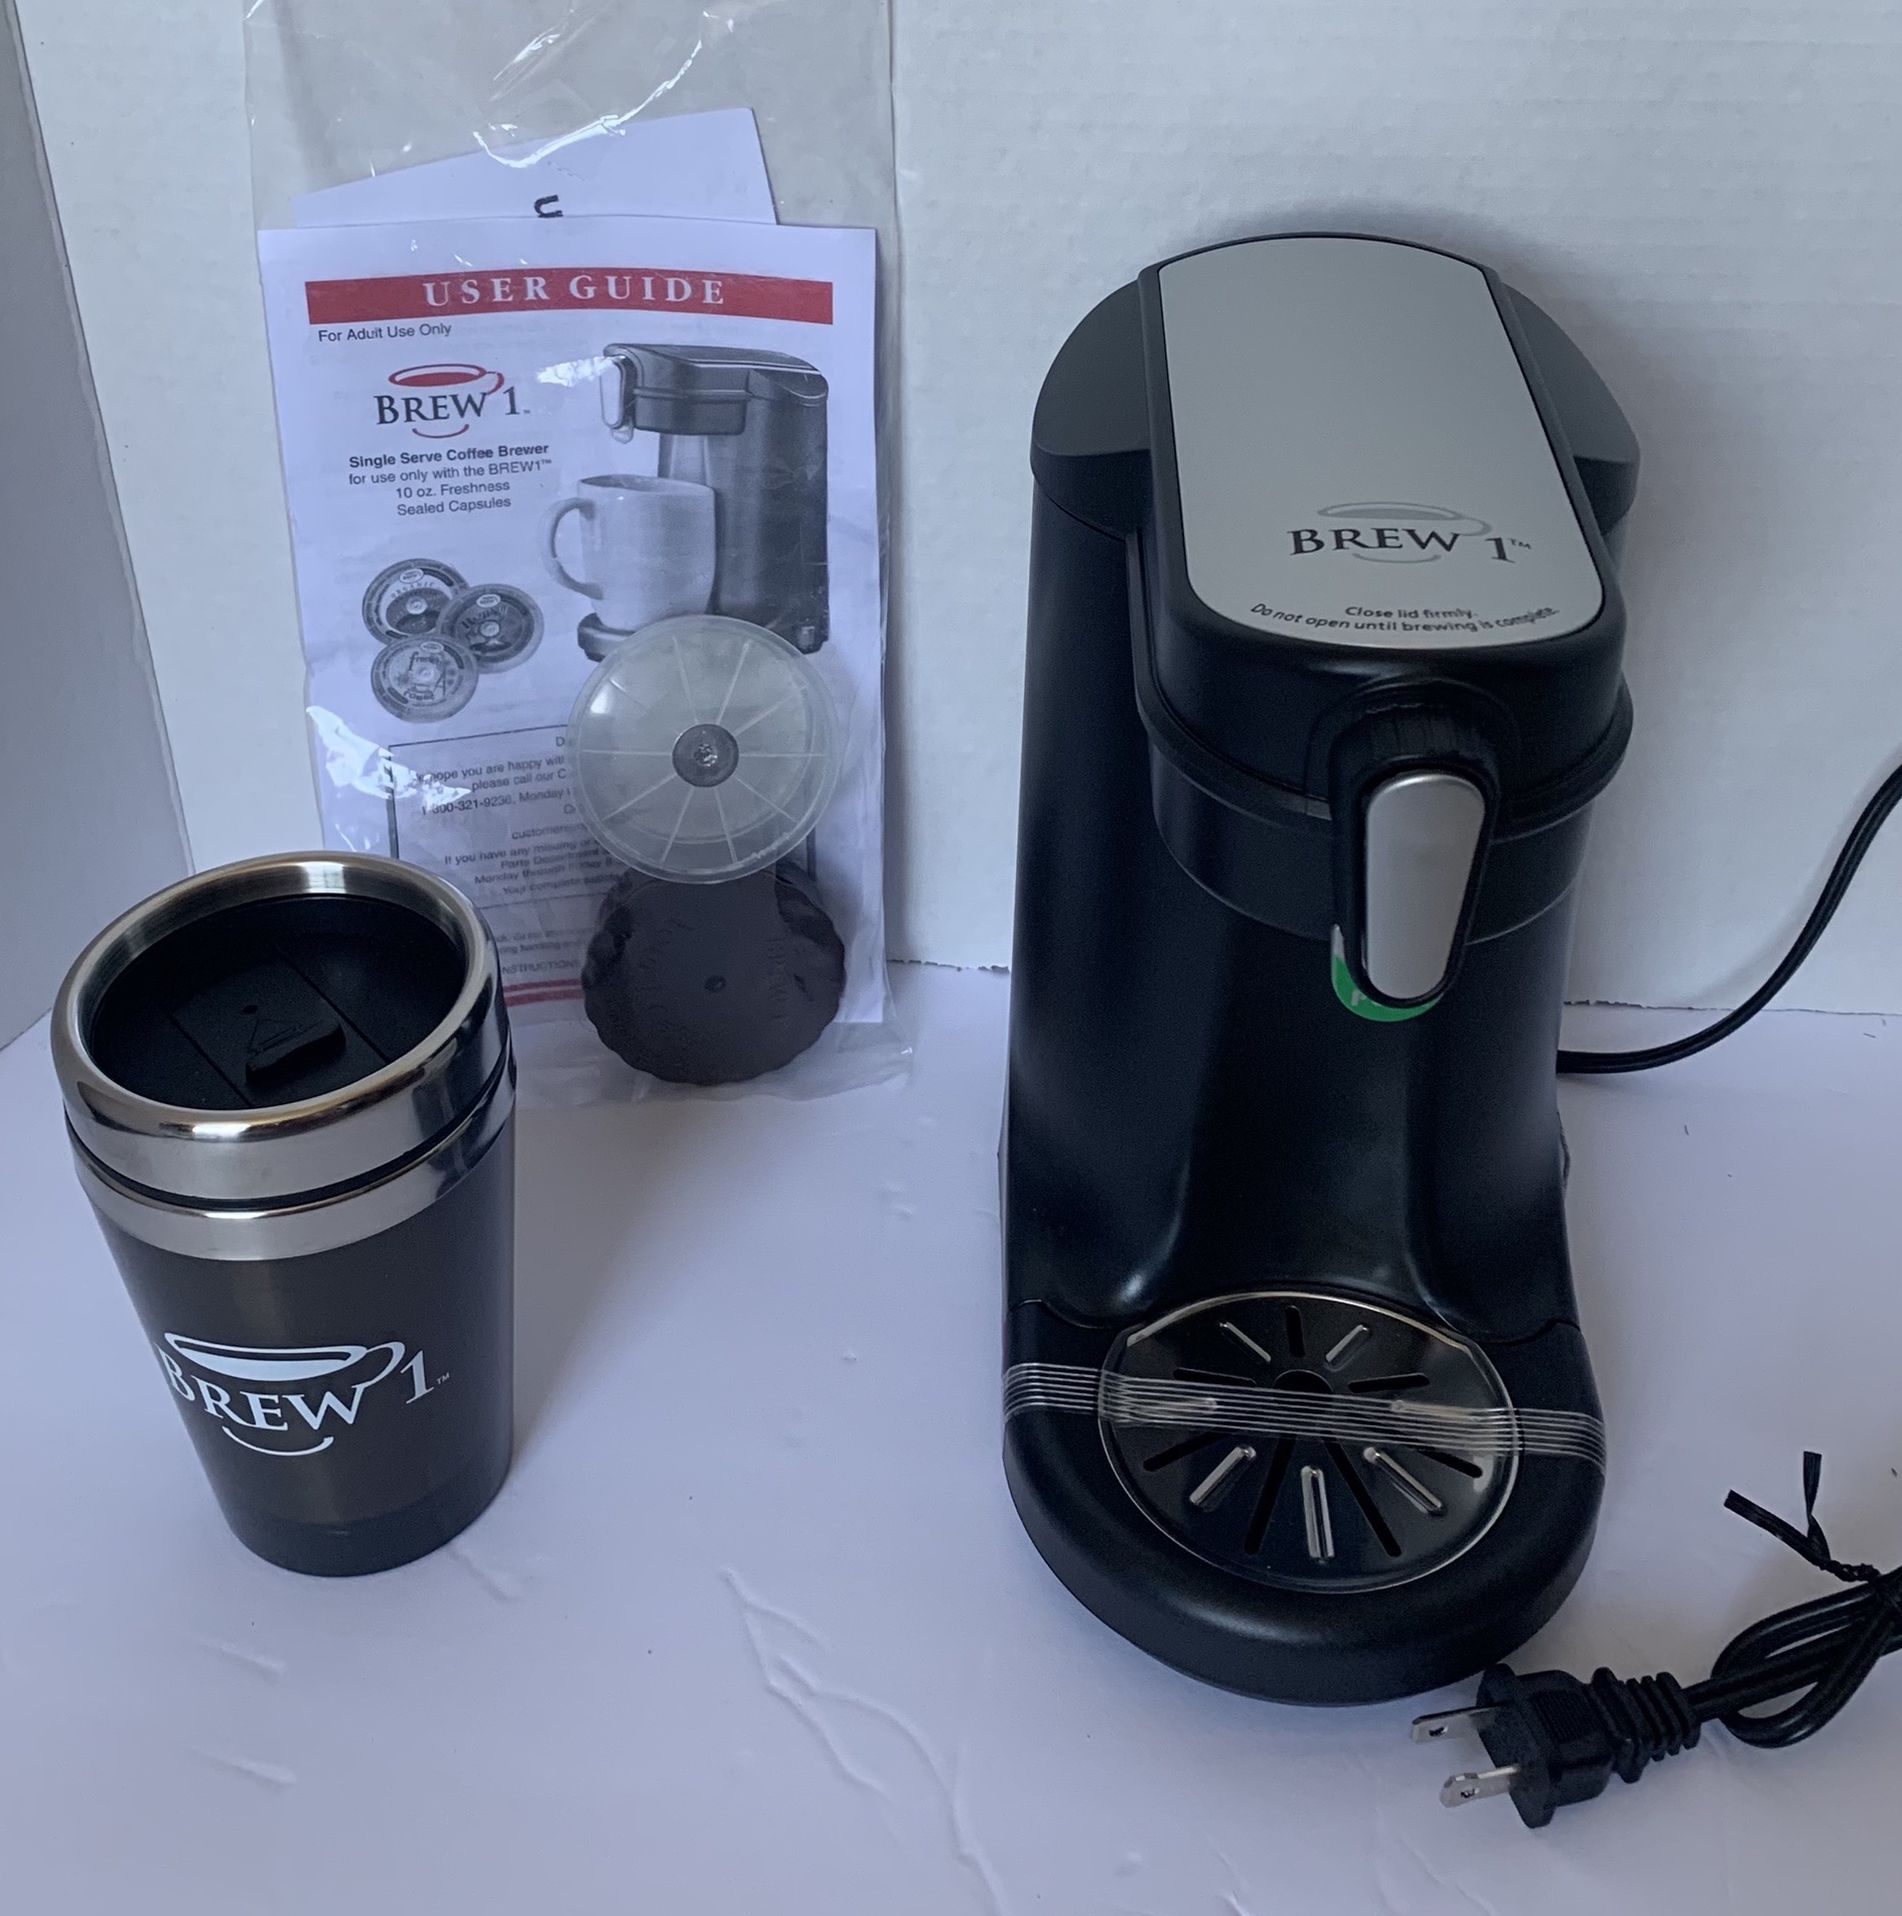 10 Oz Brew 1 Single Serve Coffee Brewer With Coffee Cup